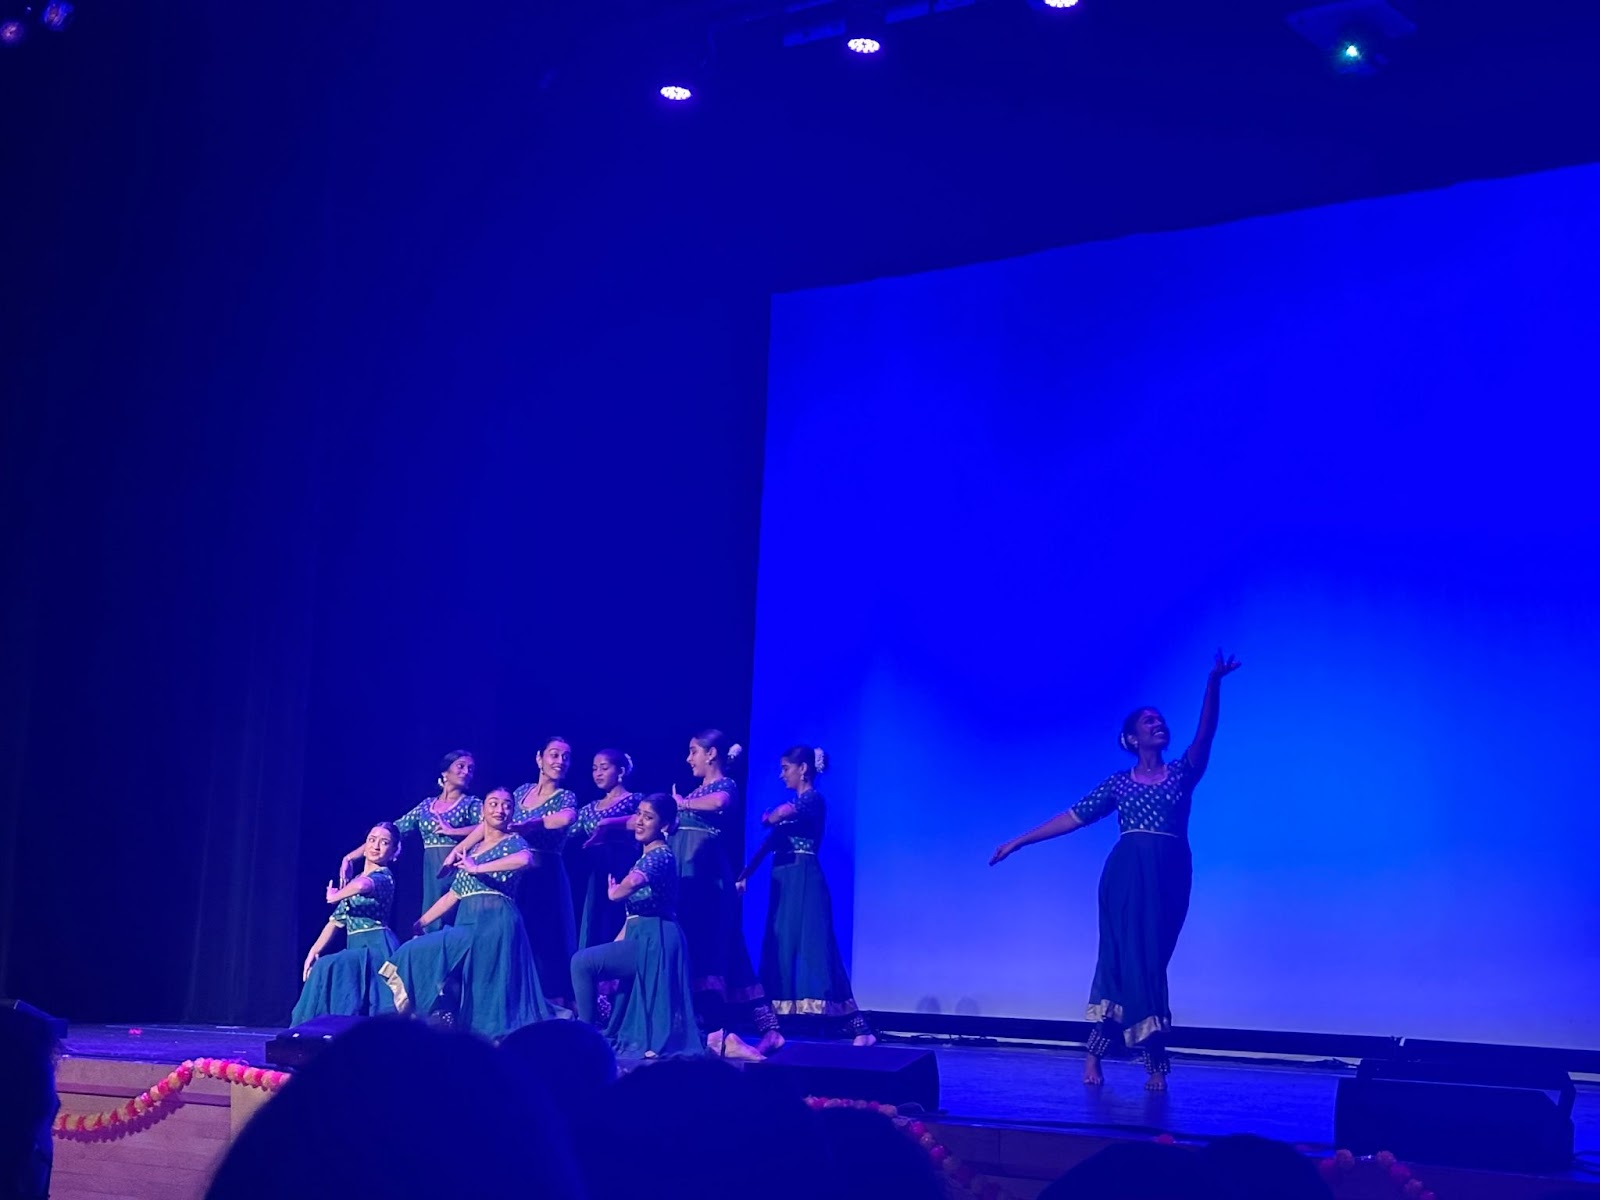 Columbia Taal celebrates South Asian dance, Indian culture and the arts